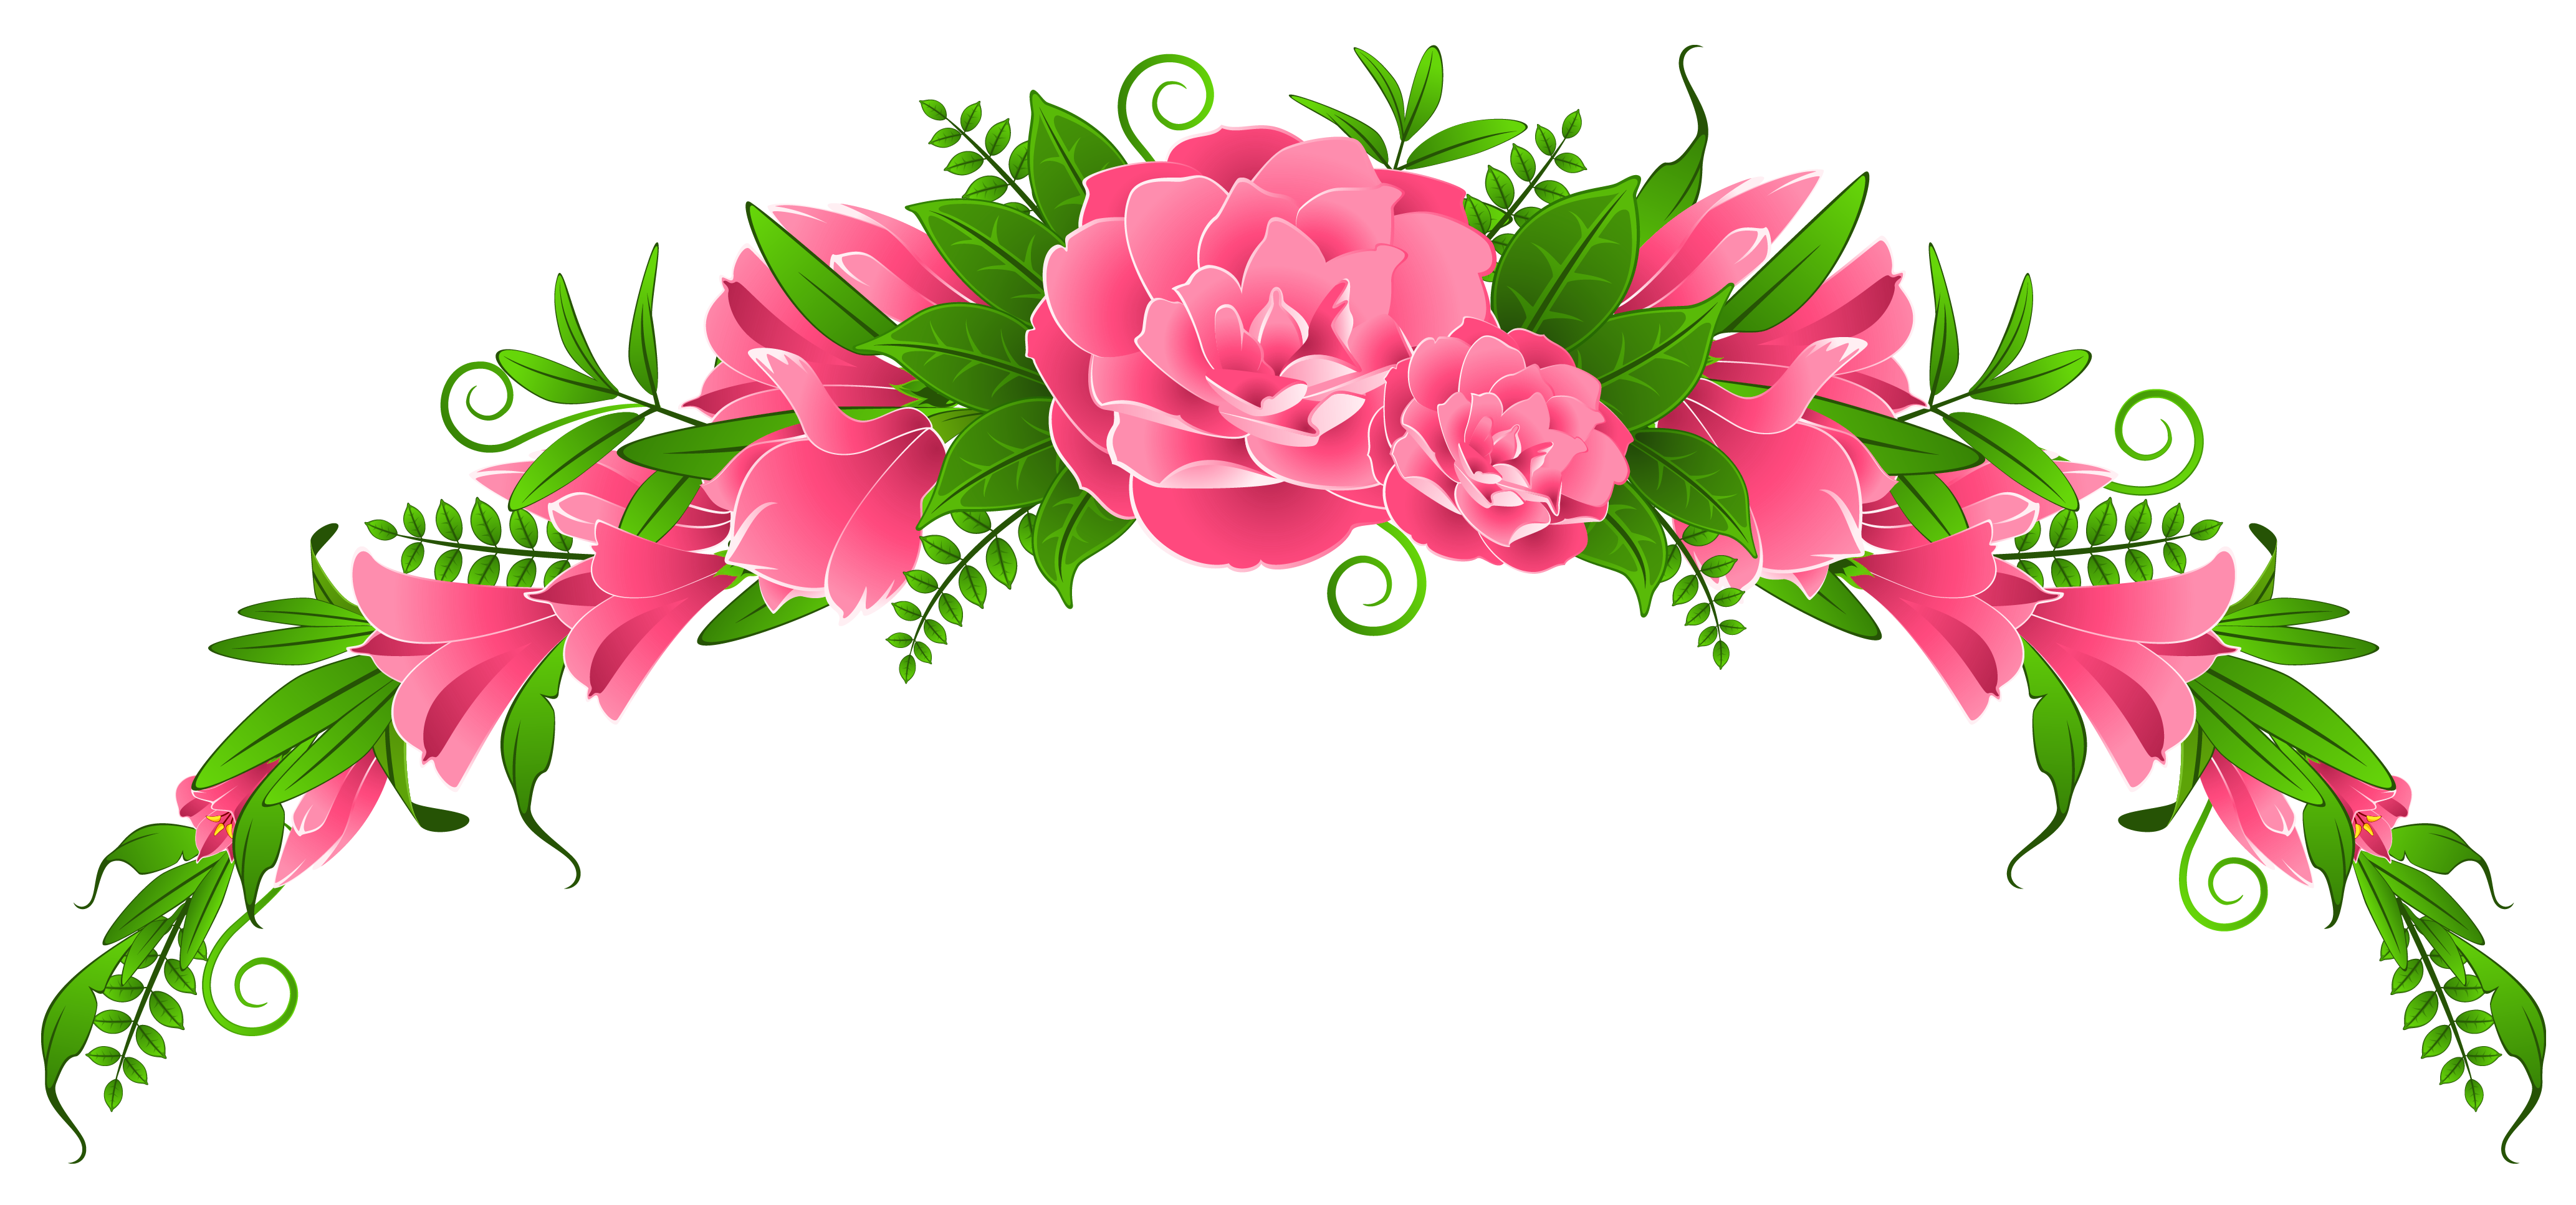 clipart pink rose flower - photo #32